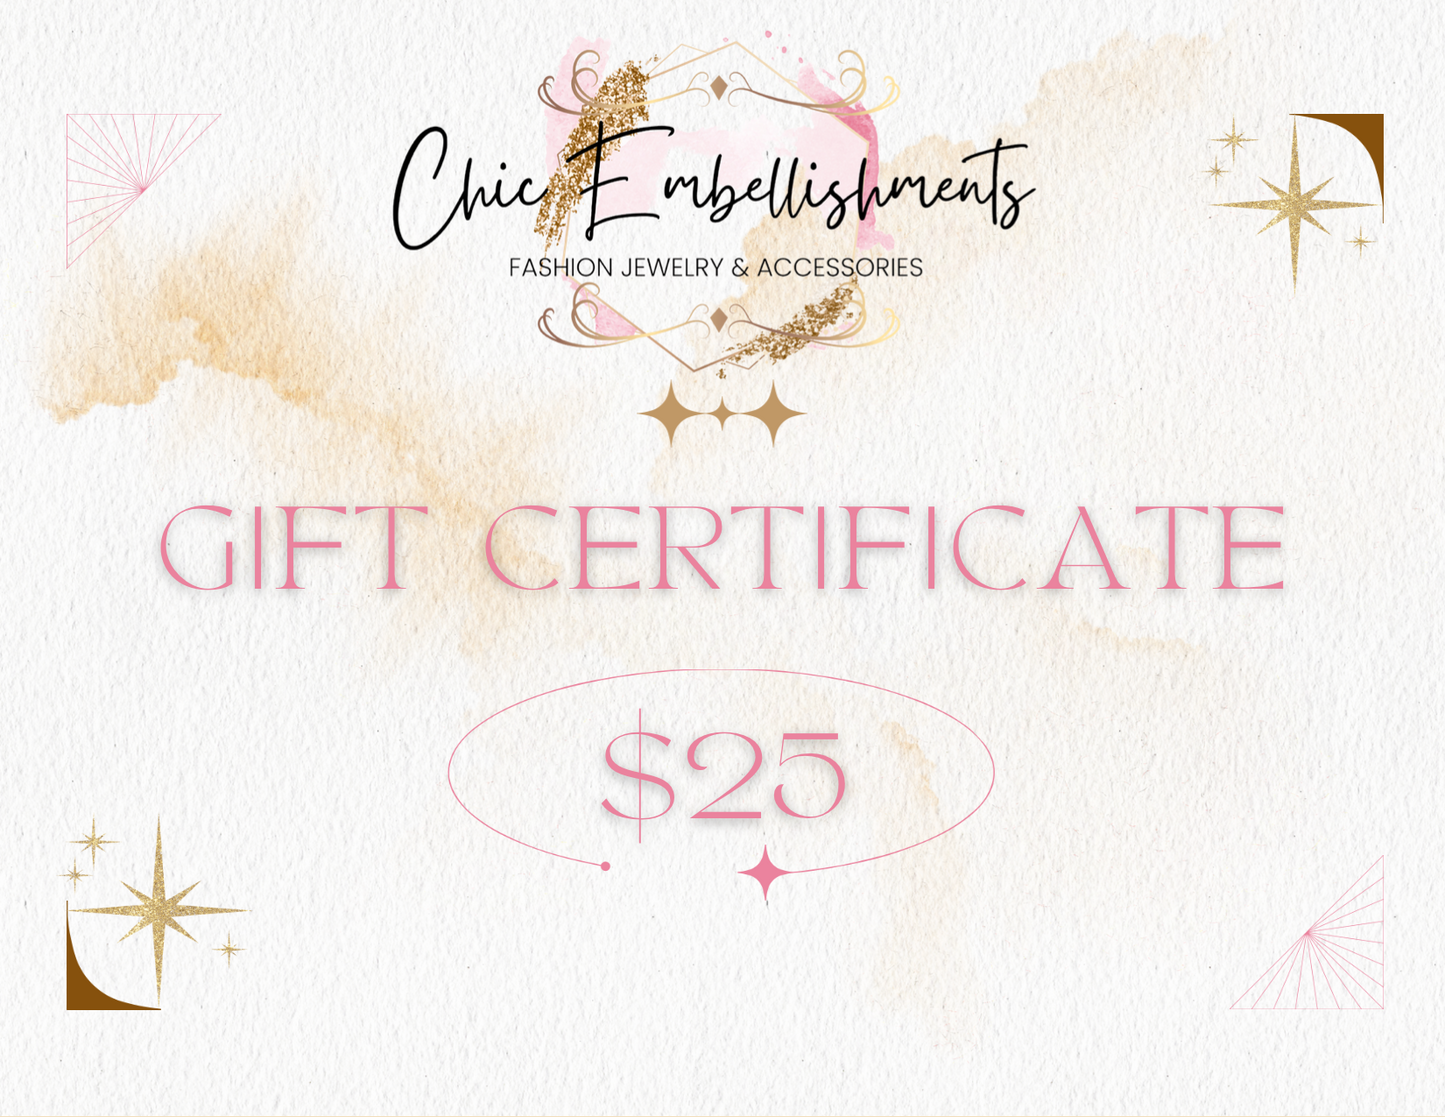 Chic Embellishments Gift Certificates